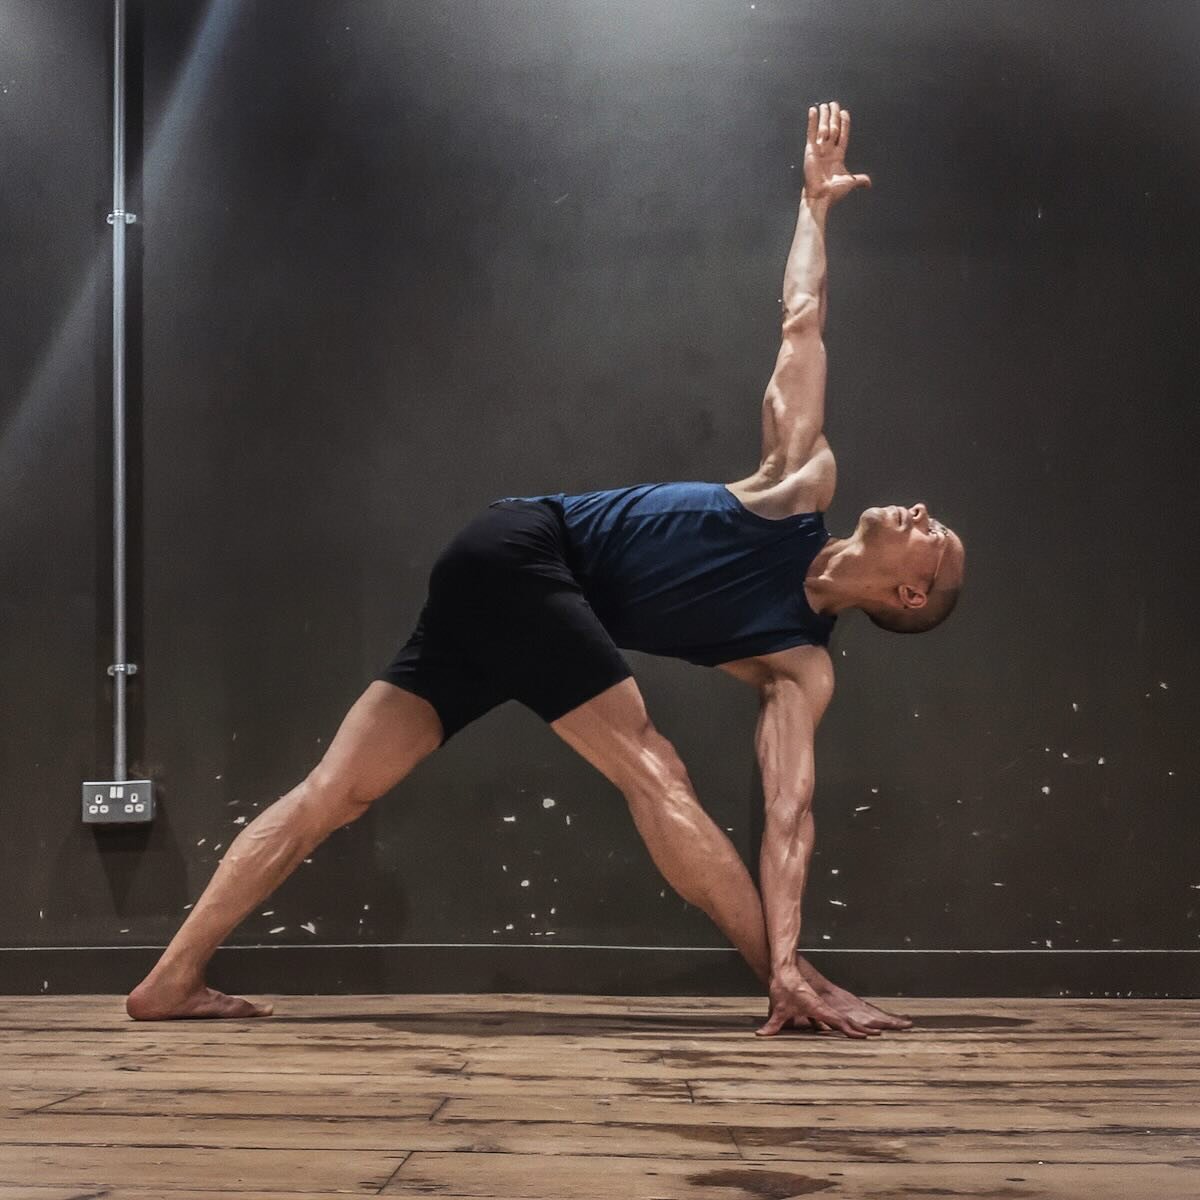 Discover the profound benefits of Iyengar Yoga with Edwin So&rsquo;s class every Thursday at 6:45 pm! 🌟

Named after the late yoga master B.K.S. Iyengar, this practice upholds the tradition of Patanjali, emphasising meticulous correctness and unpara